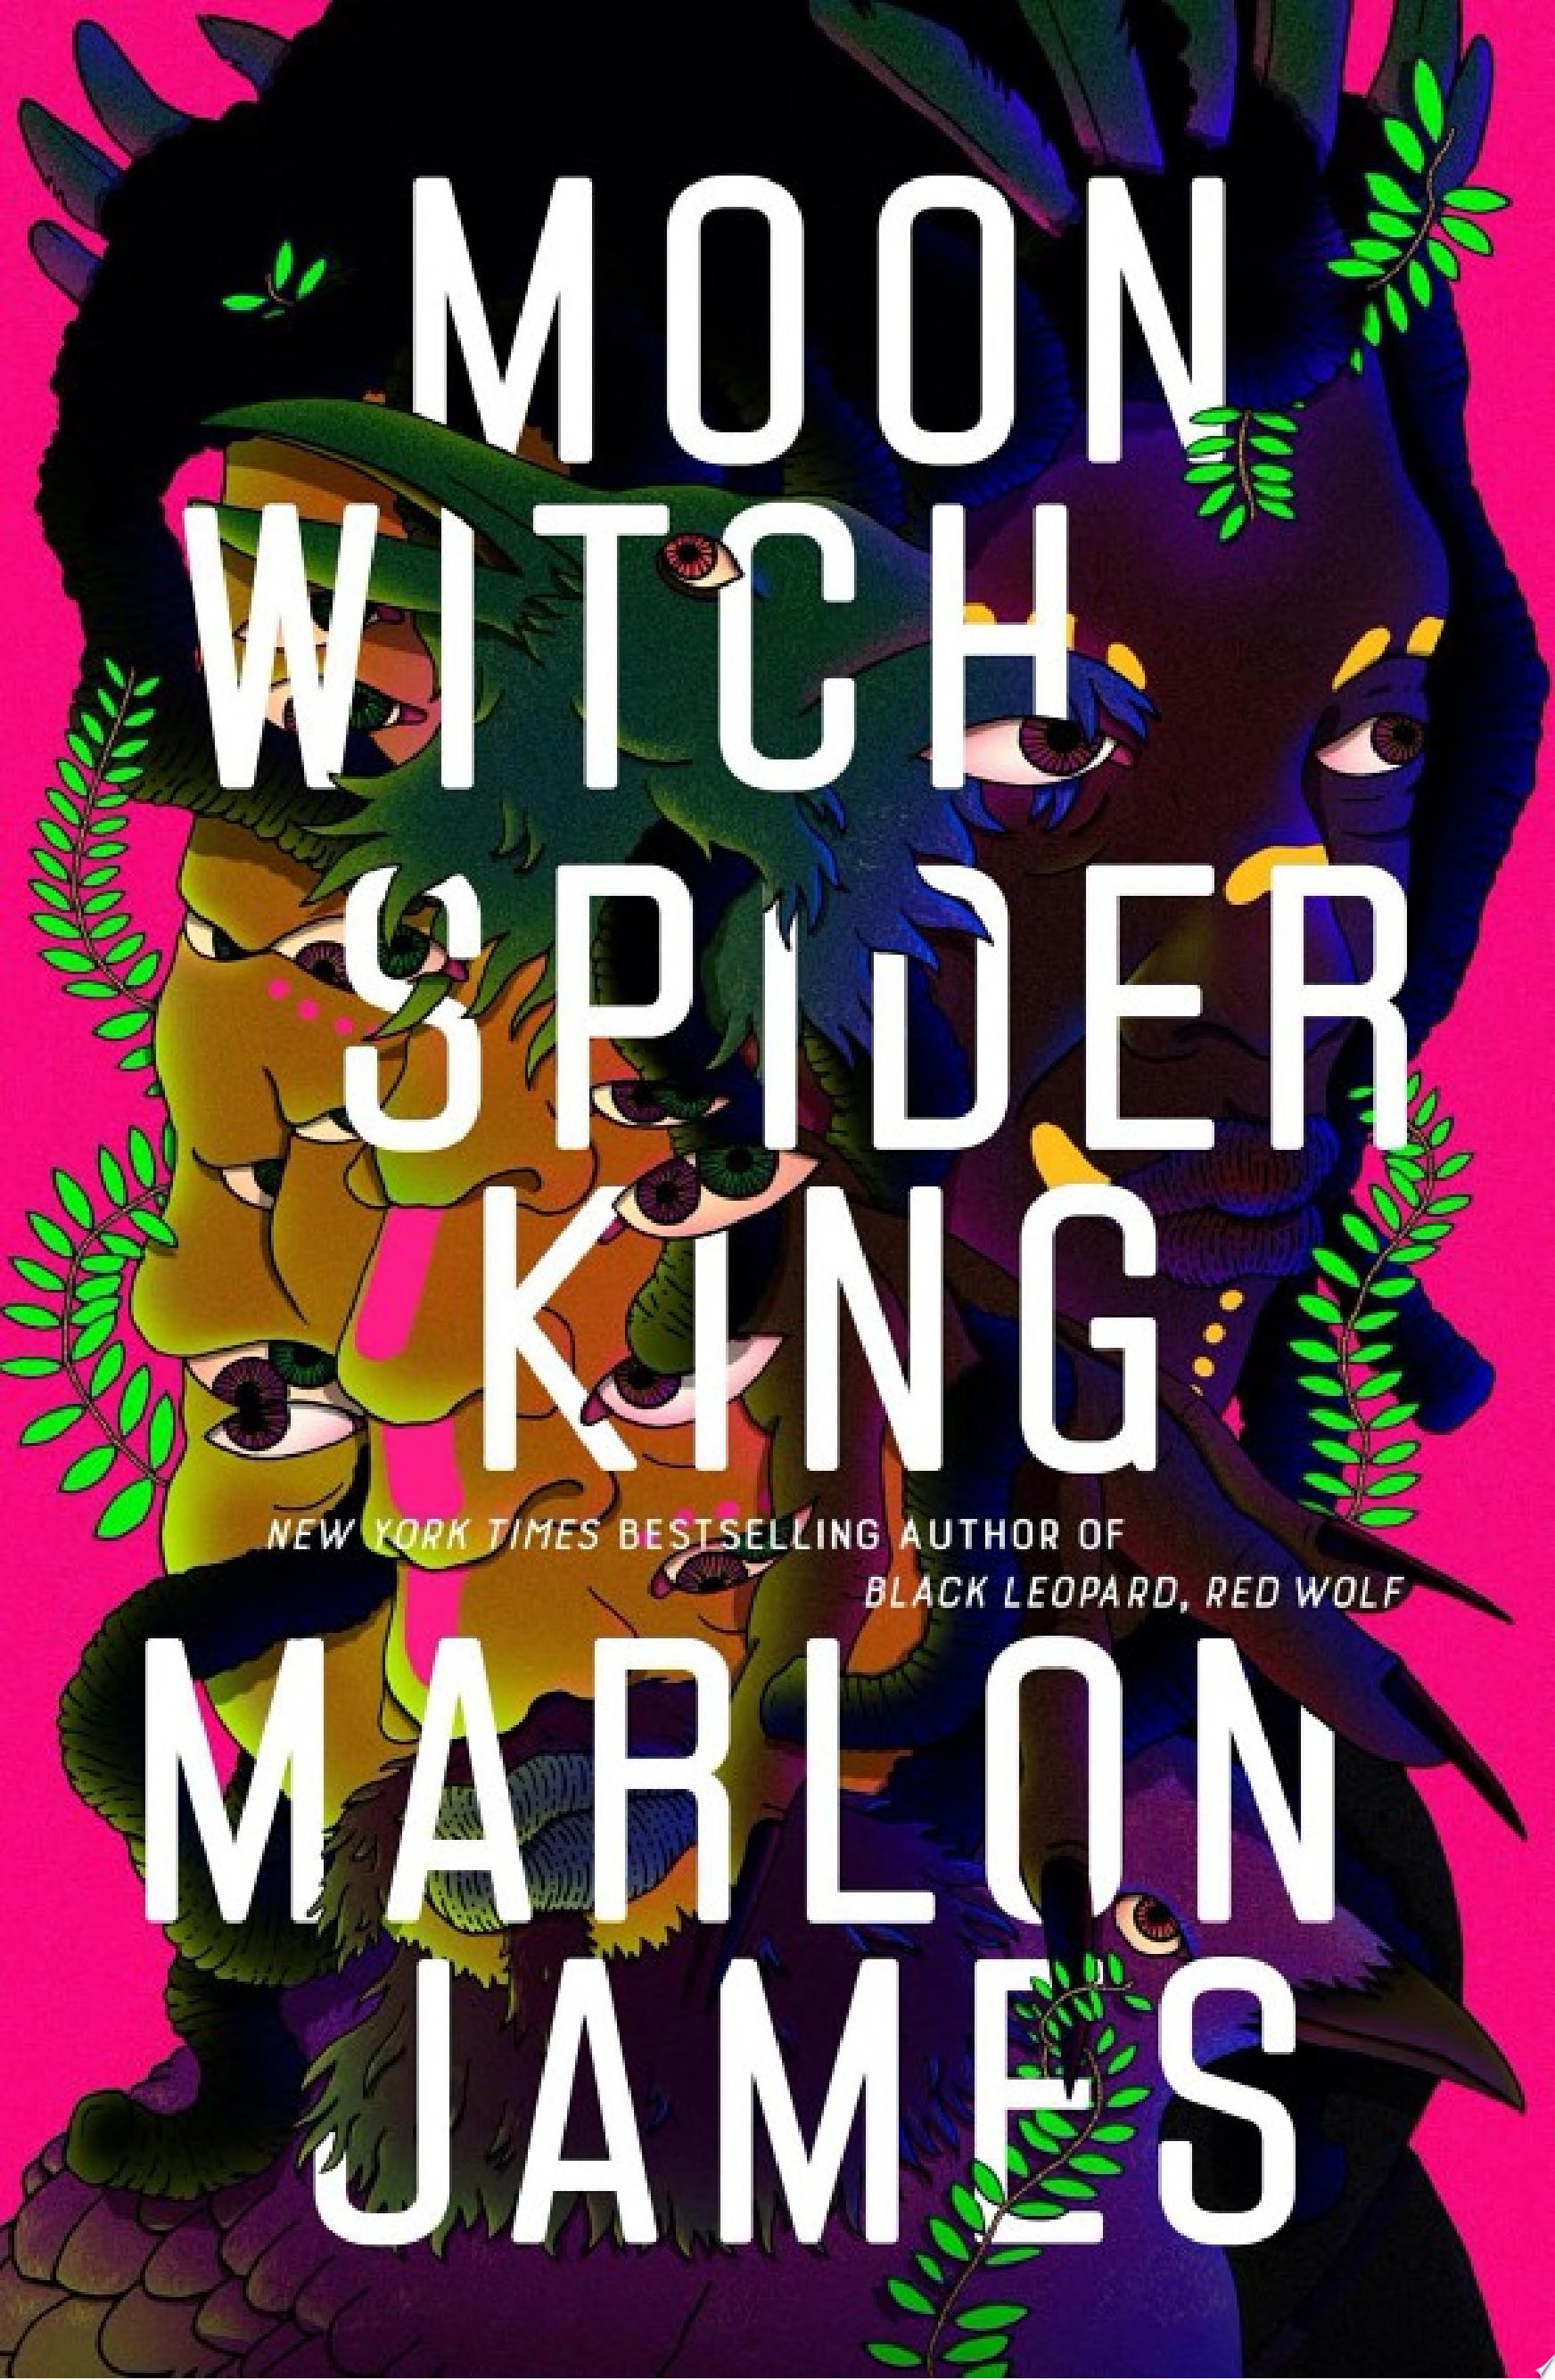 Image for "Moon Witch, Spider King"